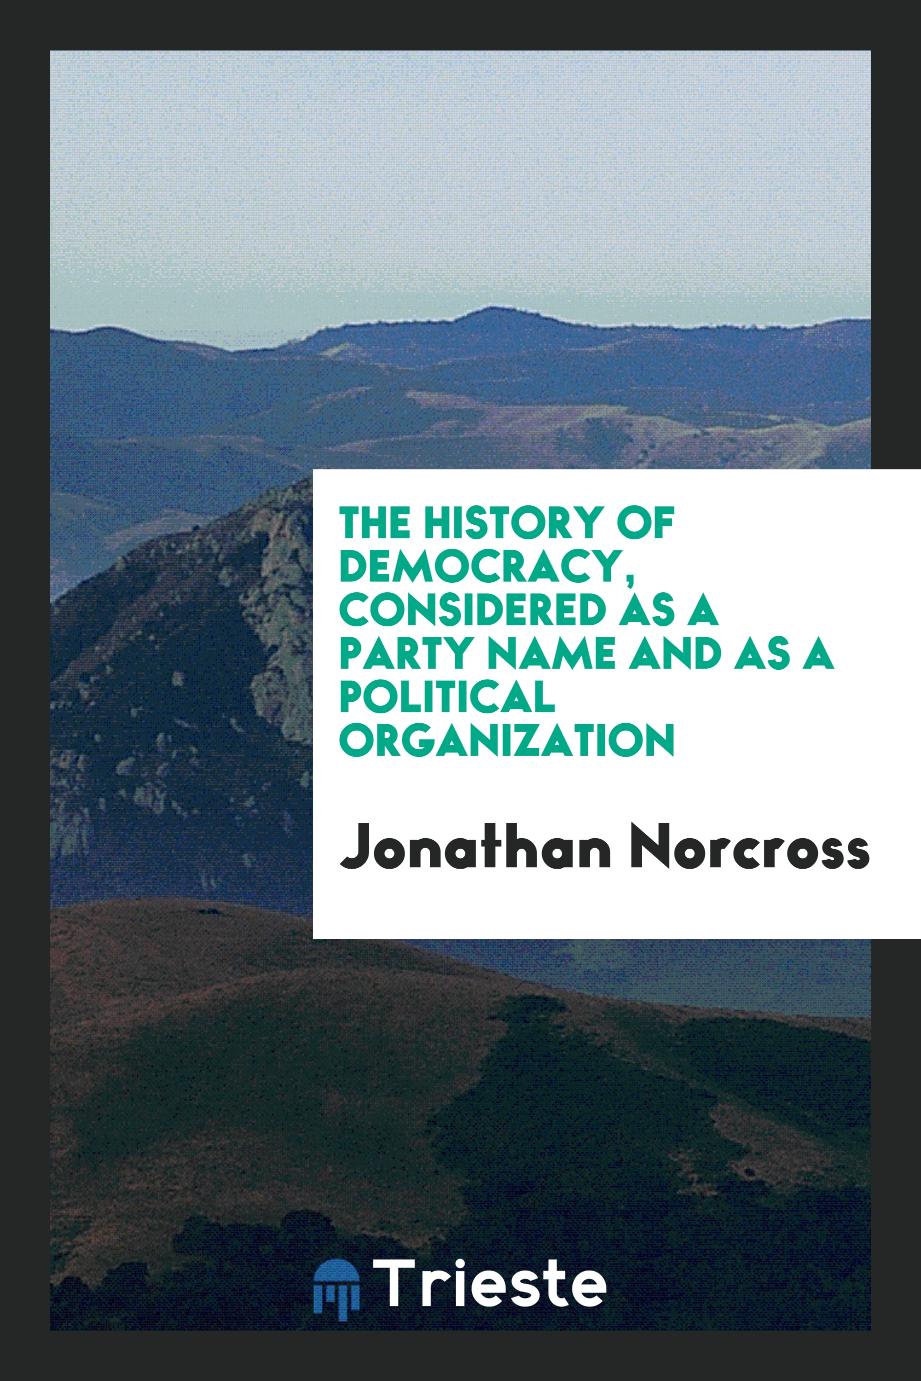 The History of Democracy, Considered as a Party Name and as a Political Organization